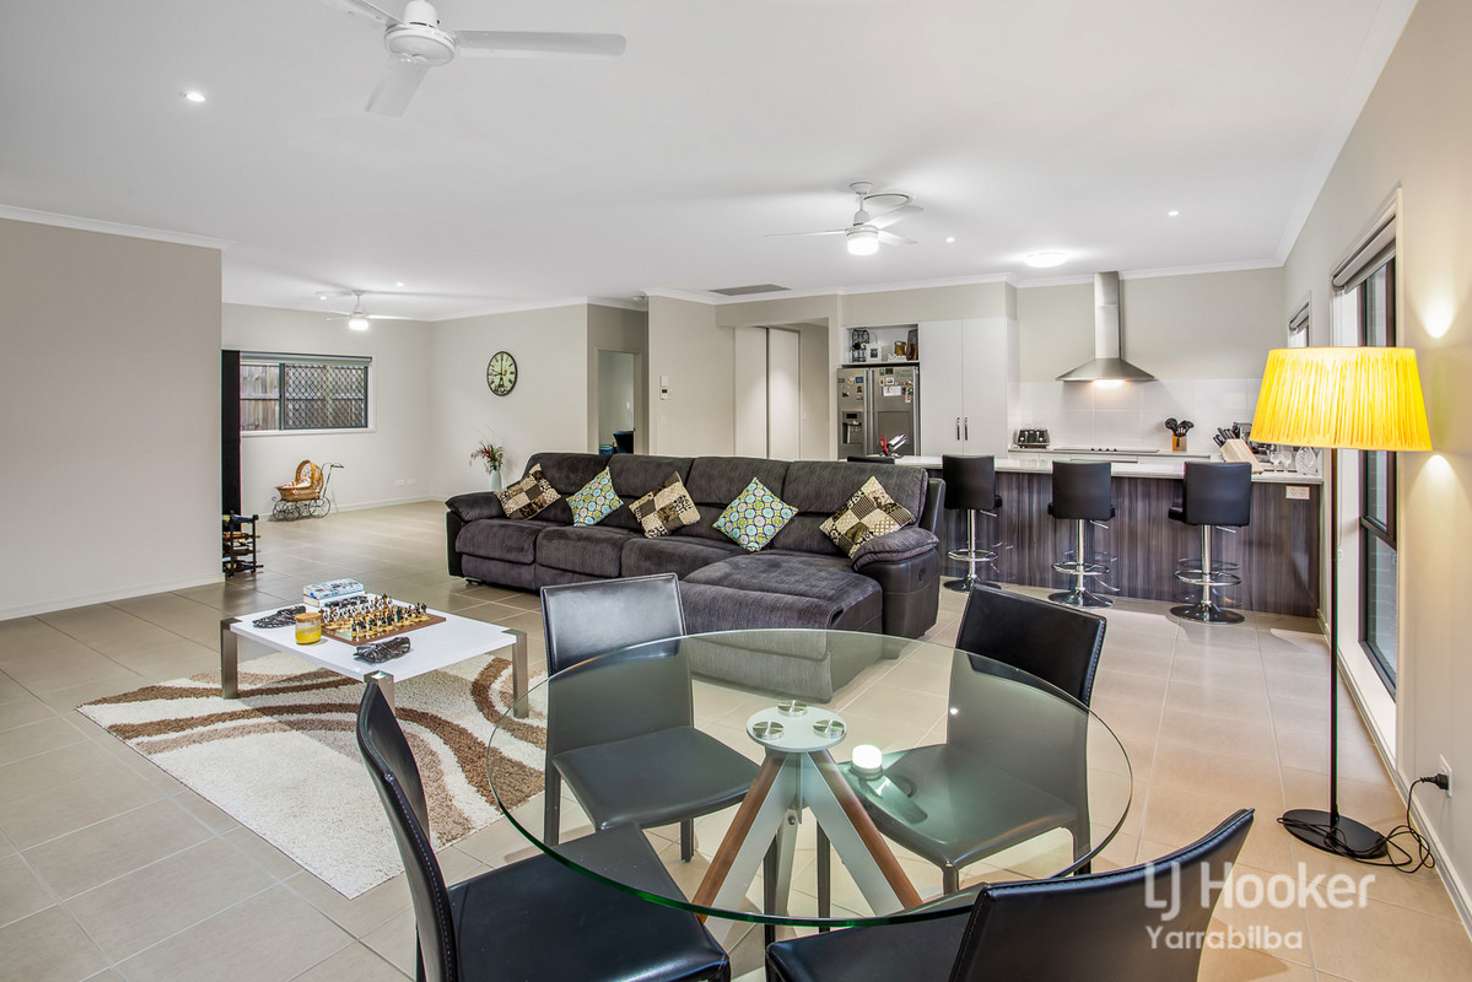 Main view of Homely house listing, 51 Huggins Avenue, Yarrabilba QLD 4207